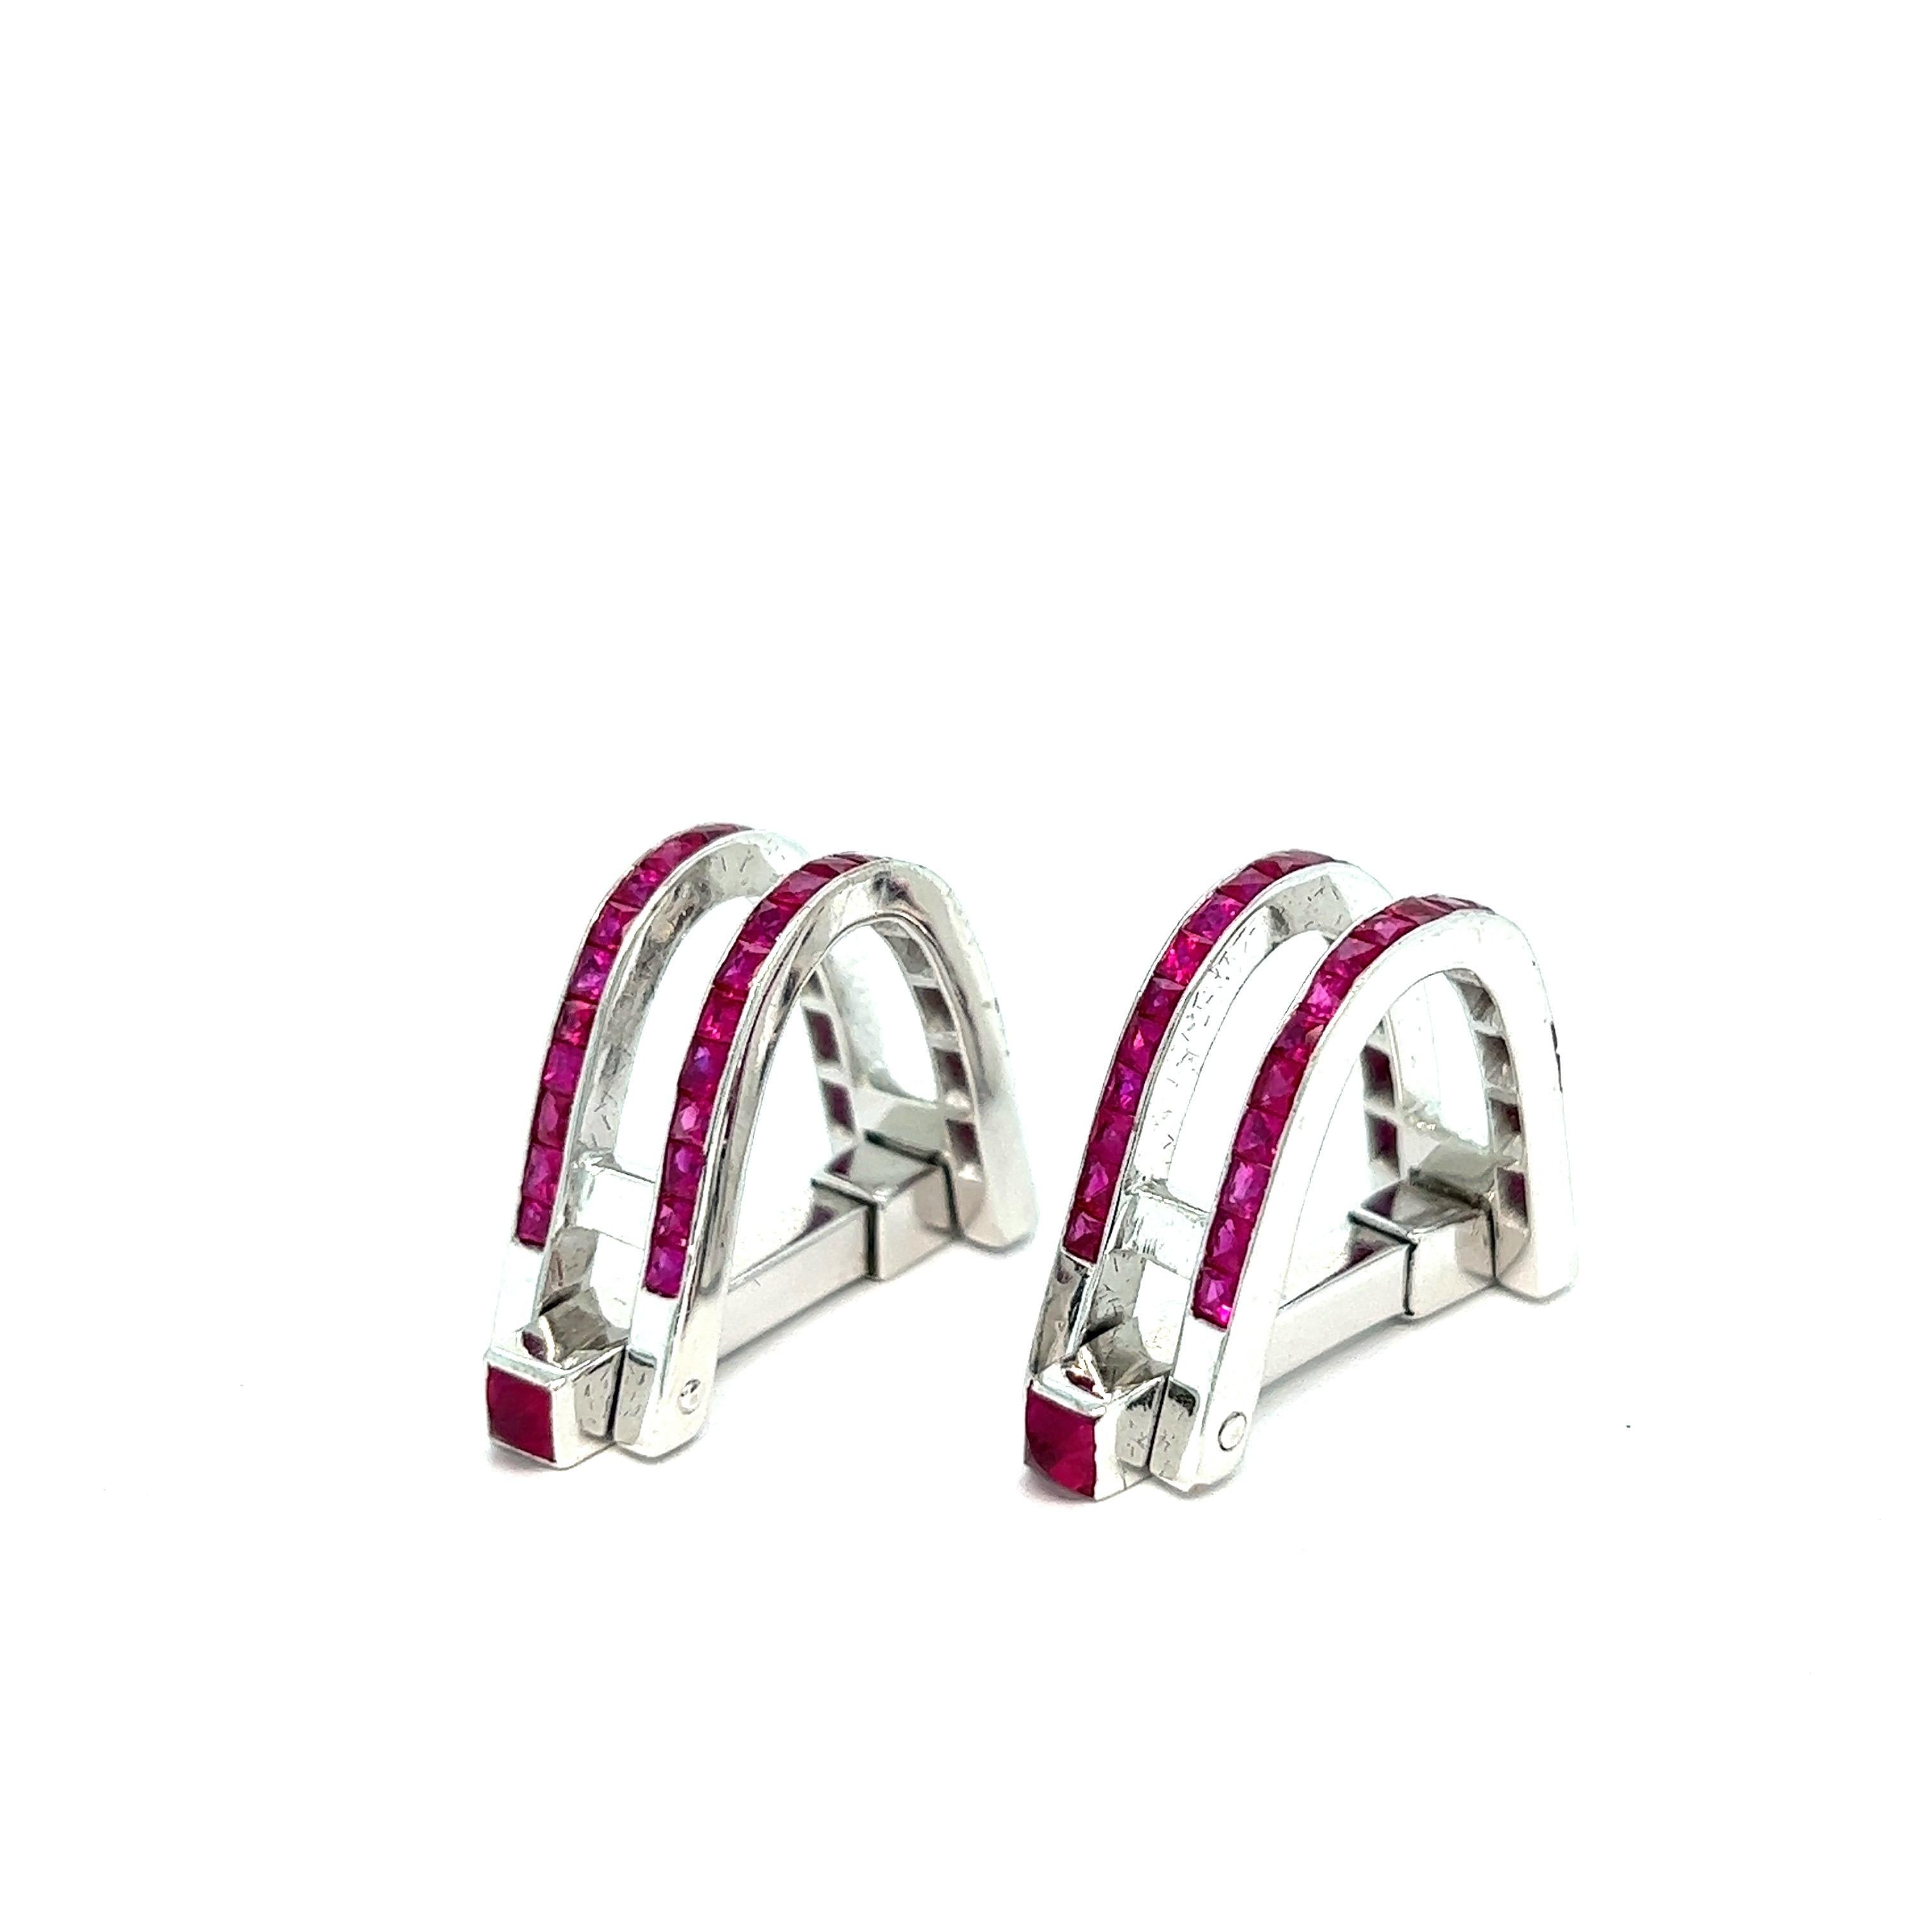 Eli Frei ruby white gold cufflinks

French-cut rubies set on 18 karat white gold

Size: width 8 mm, length 30 mm
Total weight: 16.4 grams